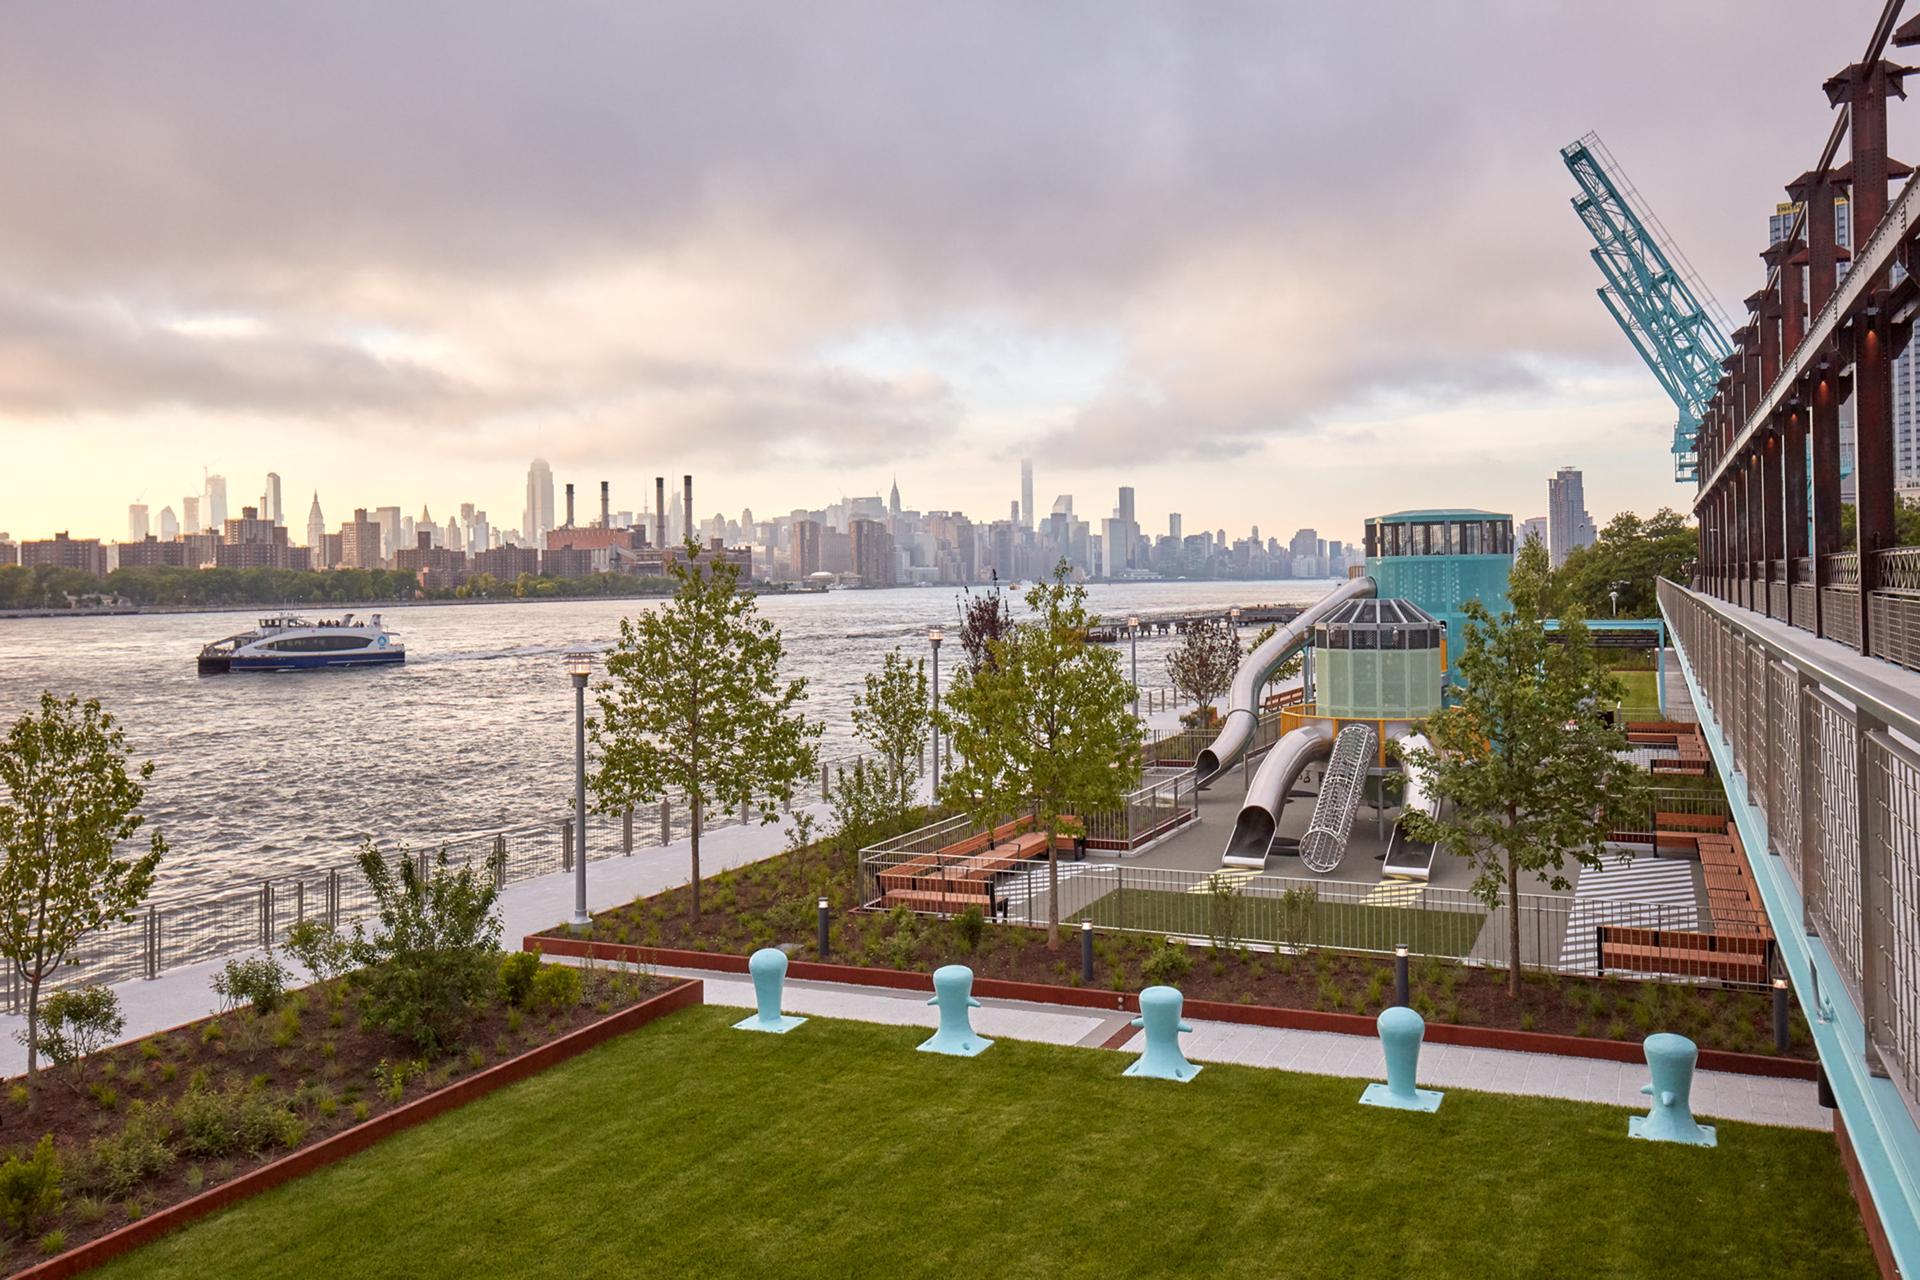 View and playground of Domino Park in Williamsburg, Brooklyn